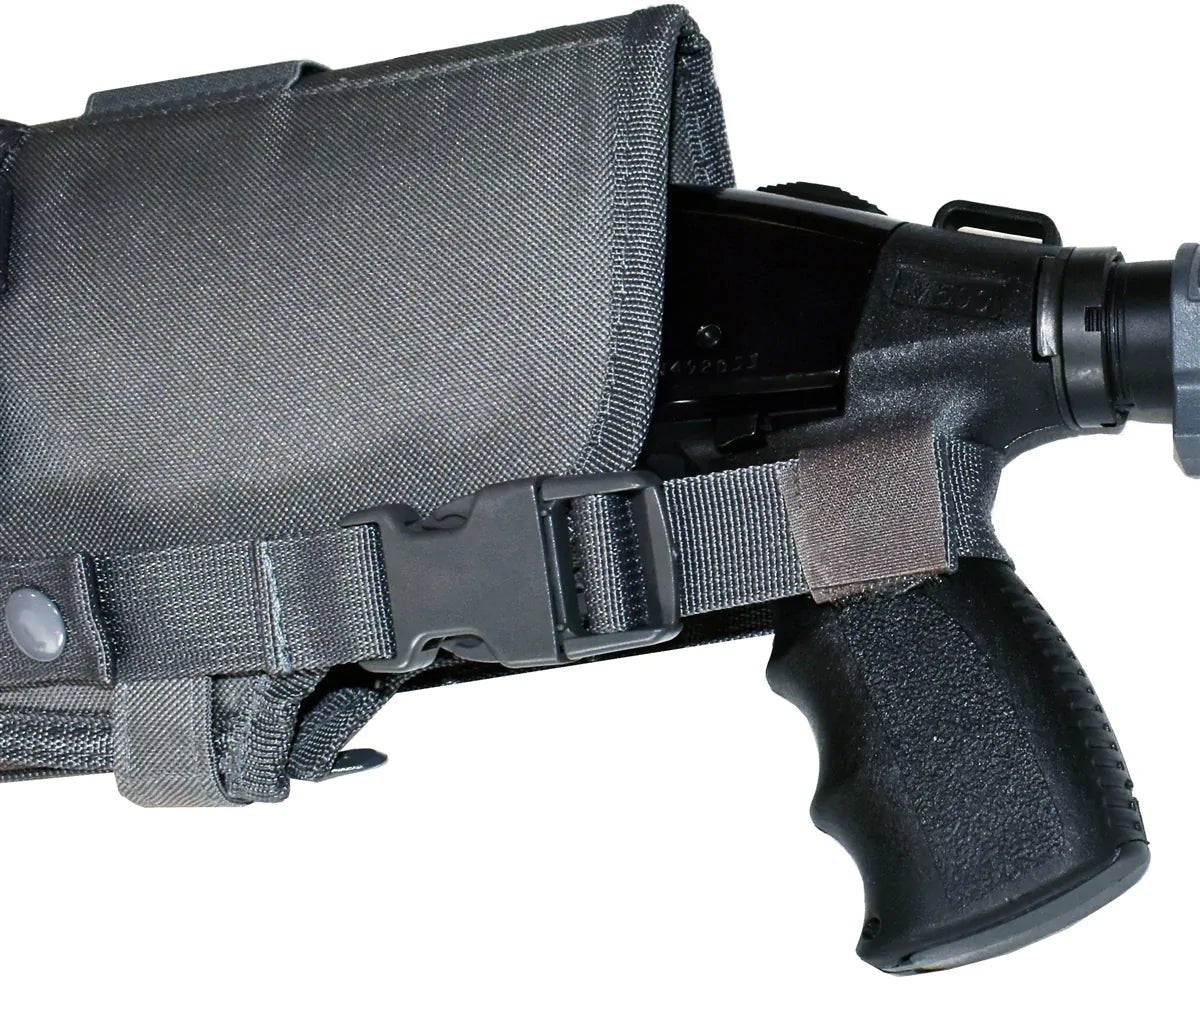 Mossberg maverick 88 12 gauge Pump Action Tactical case Hunting Storage Soft Range molle Holster Bag Shoulder Military Security ATV Horse Motorcycle Padded Bag Gray 25 inches. - TRINITY SUPPLY INC